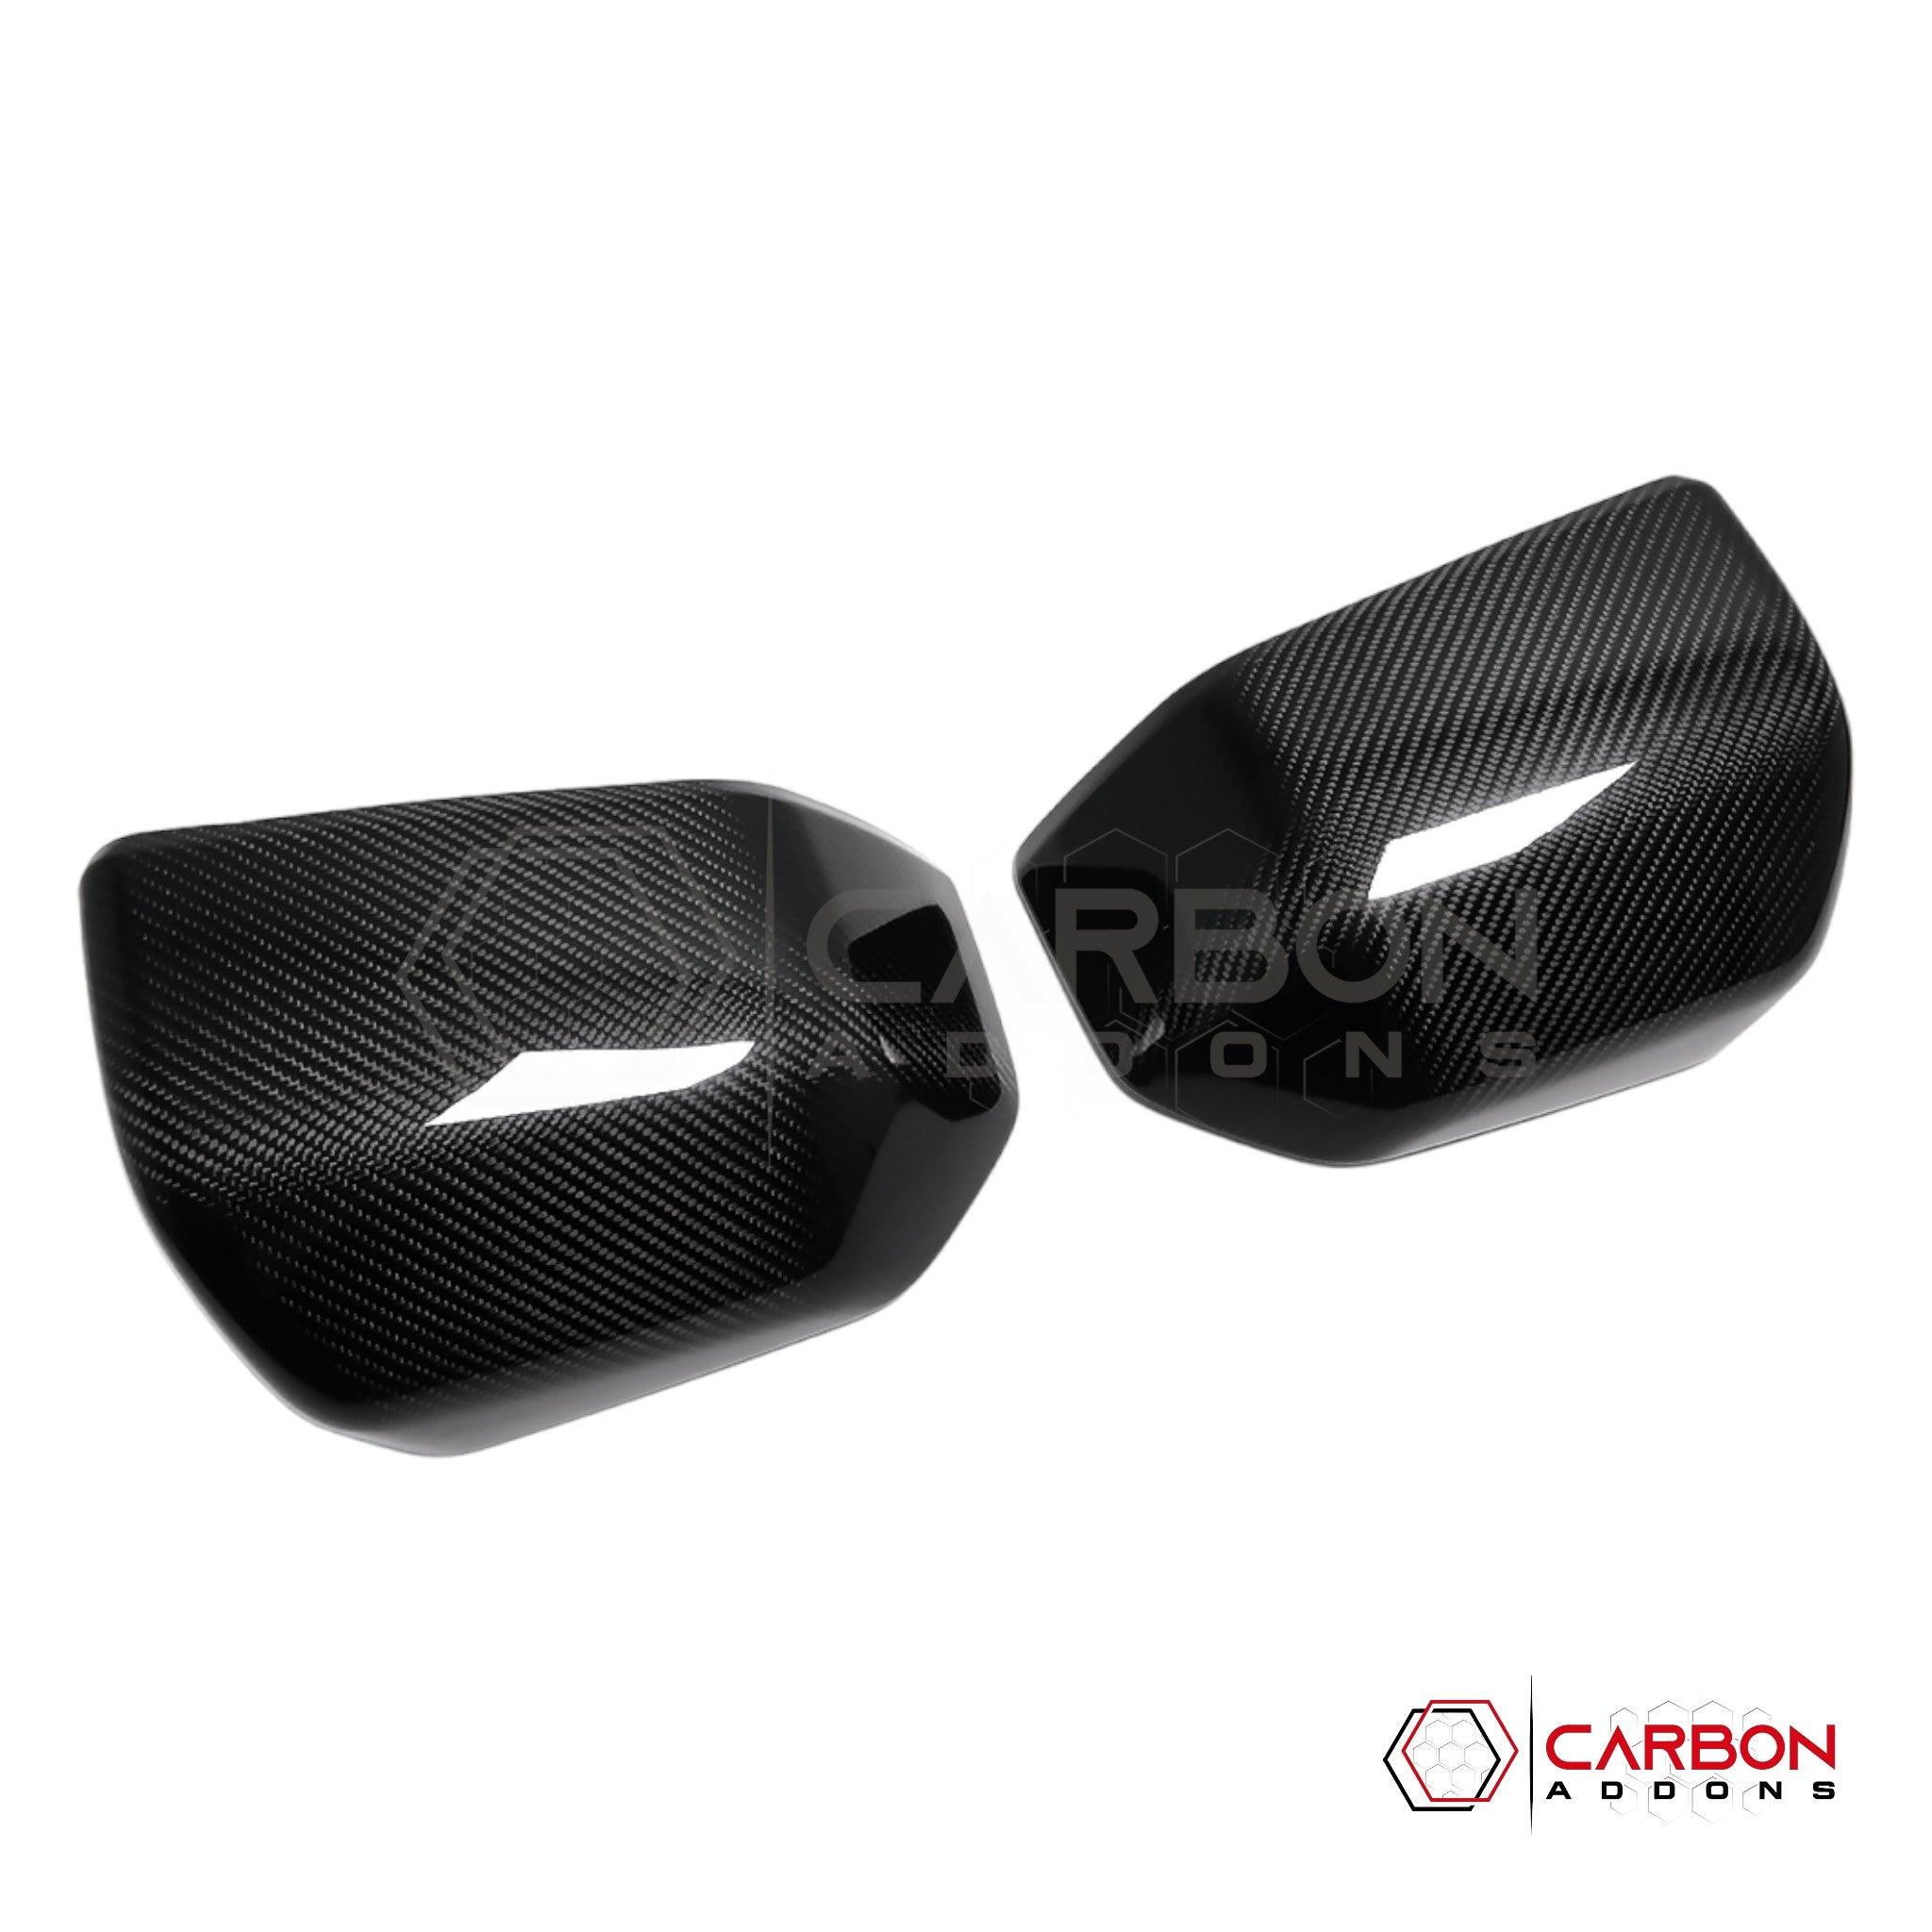 [Coming Soon] Ford F150 2015-2020 Rear View Mirror Hard Carbon Fiber Cover - carbonaddons Carbon Fiber Parts, Accessories, Upgrades, Mods